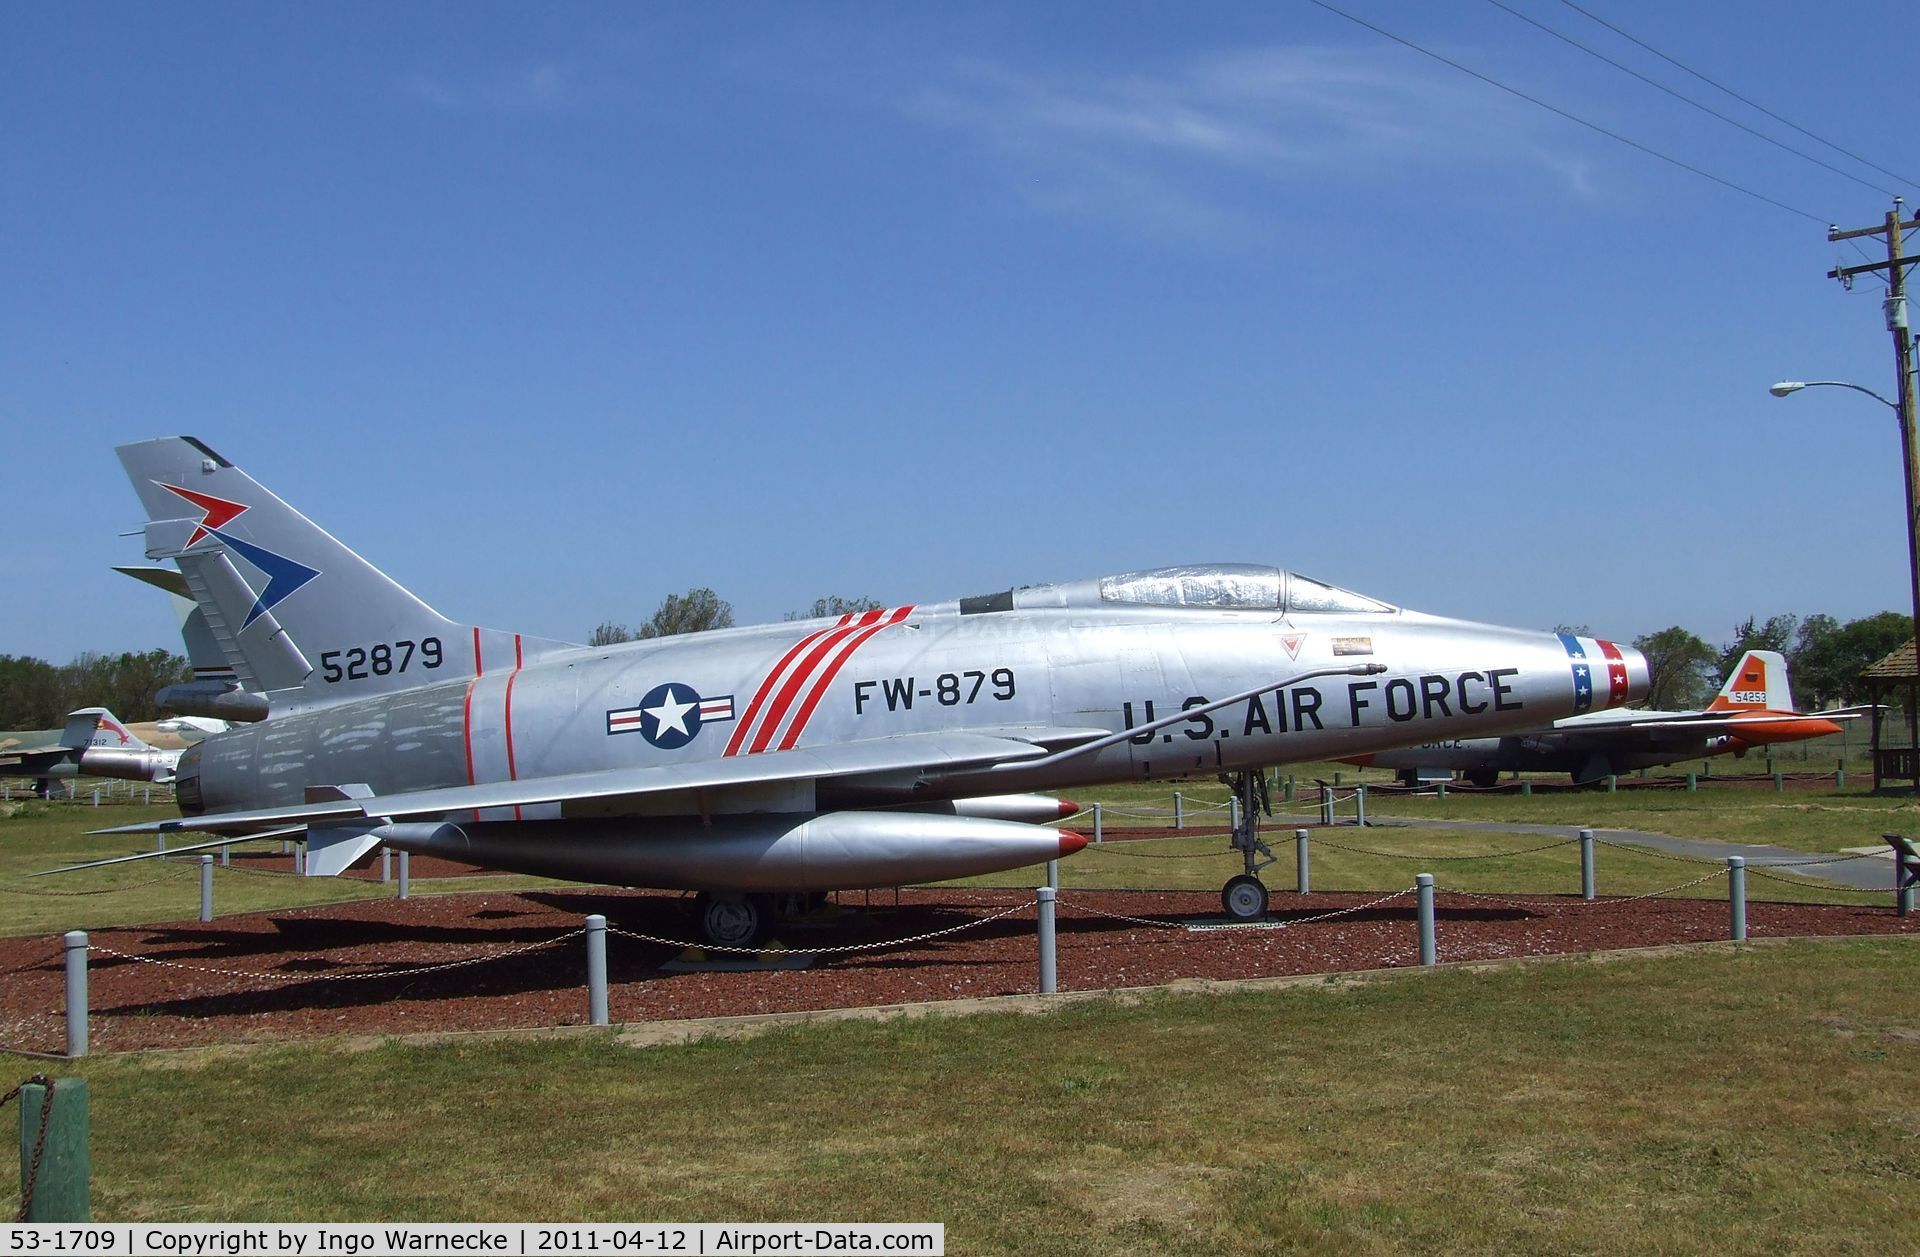 53-1709, North American F-100C C/N 214-1, North American F-100C Super Sabre (displayed as F-100D 55-2879) at the Castle Air Museum, Atwater CA